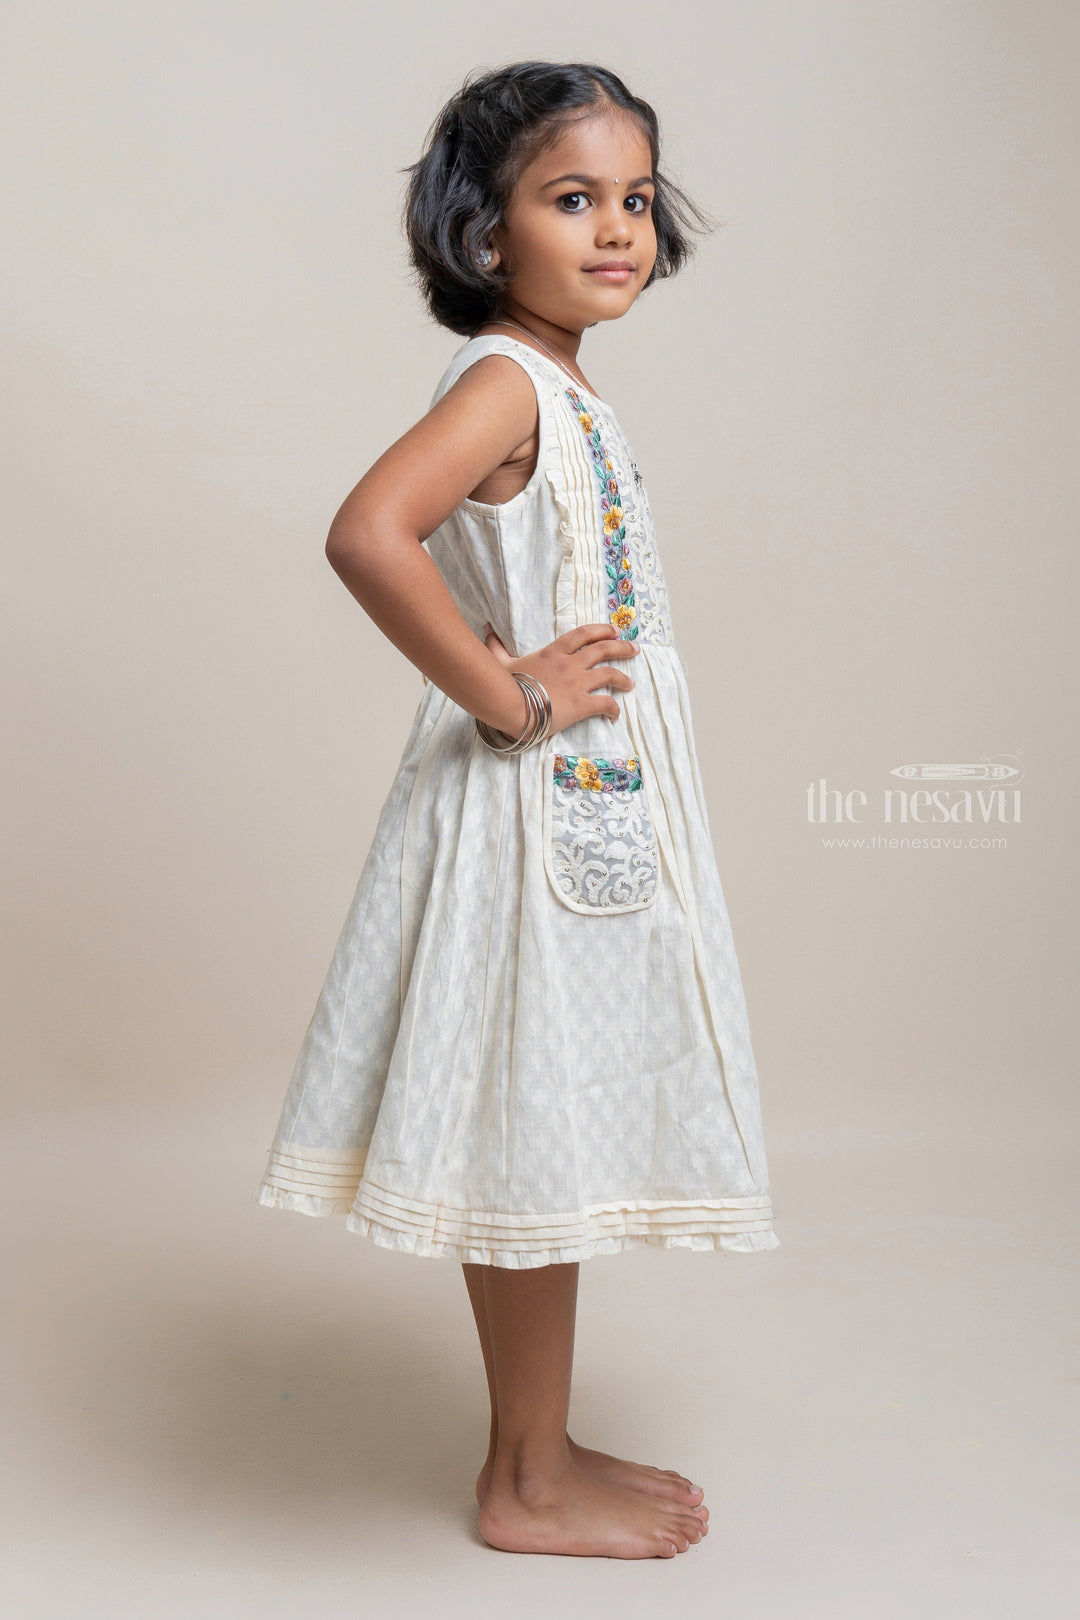 The Nesavu Girls Cotton Frock Beautiful Half White Self Butti Floral Embroidery Designer Casual Frock For Girls Nesavu Fantastic Collection For Girls | Cotton Wear For Girls | The Nesavu